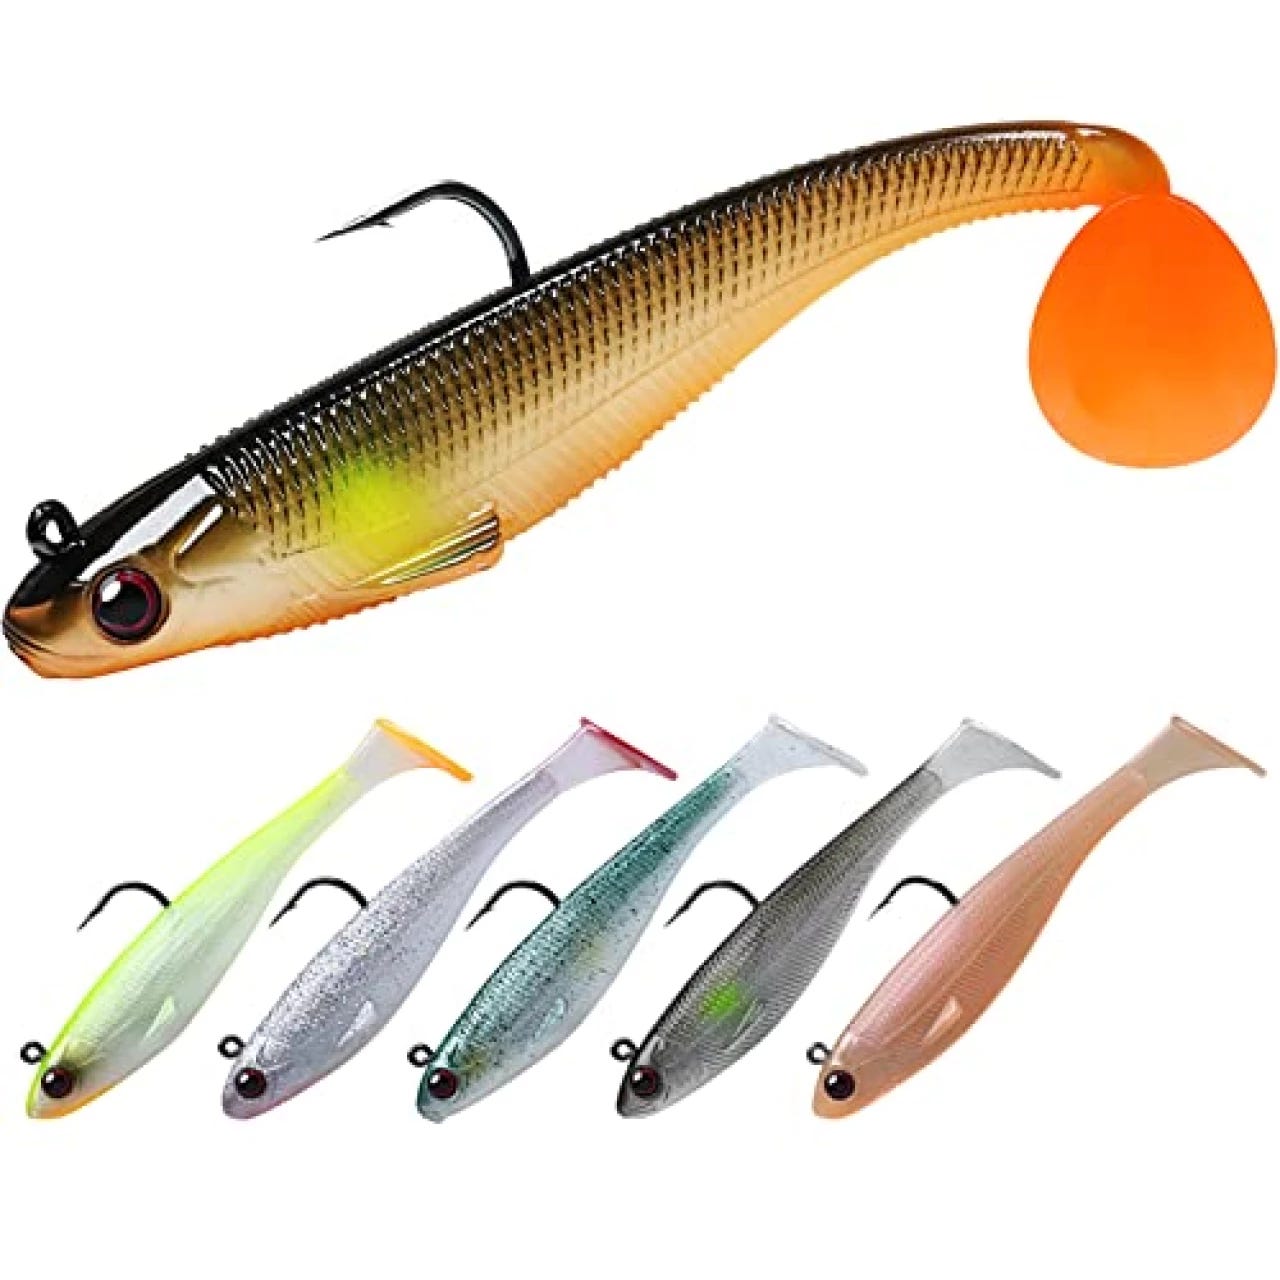 2023 TRUSCEND Fishing Lures Review: Best Bass Trout Gear, by Magdalena